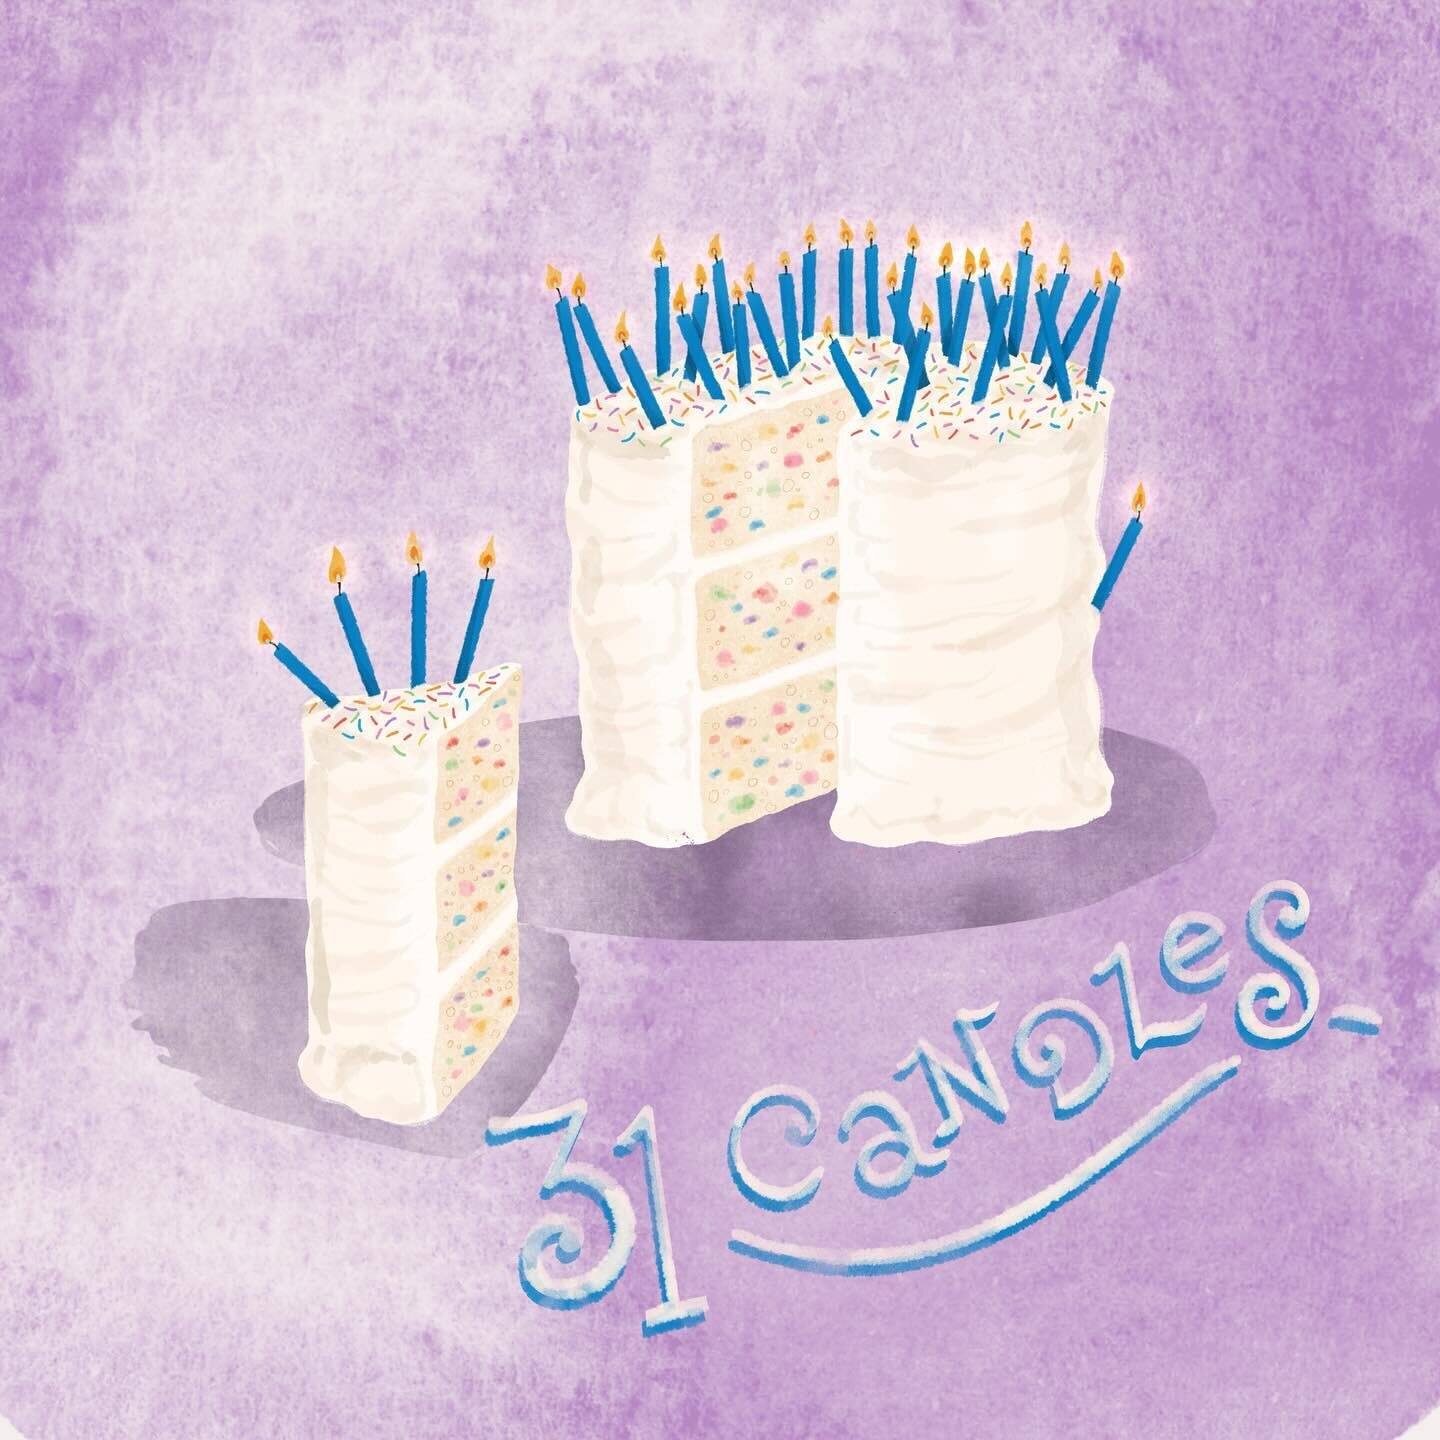 It&rsquo;s like 16 candles but almost double 🎂 (happy birthday to me, a week late&hellip; because baby 😉) #birthdaycarddesign #thirtiesclub #funfetti